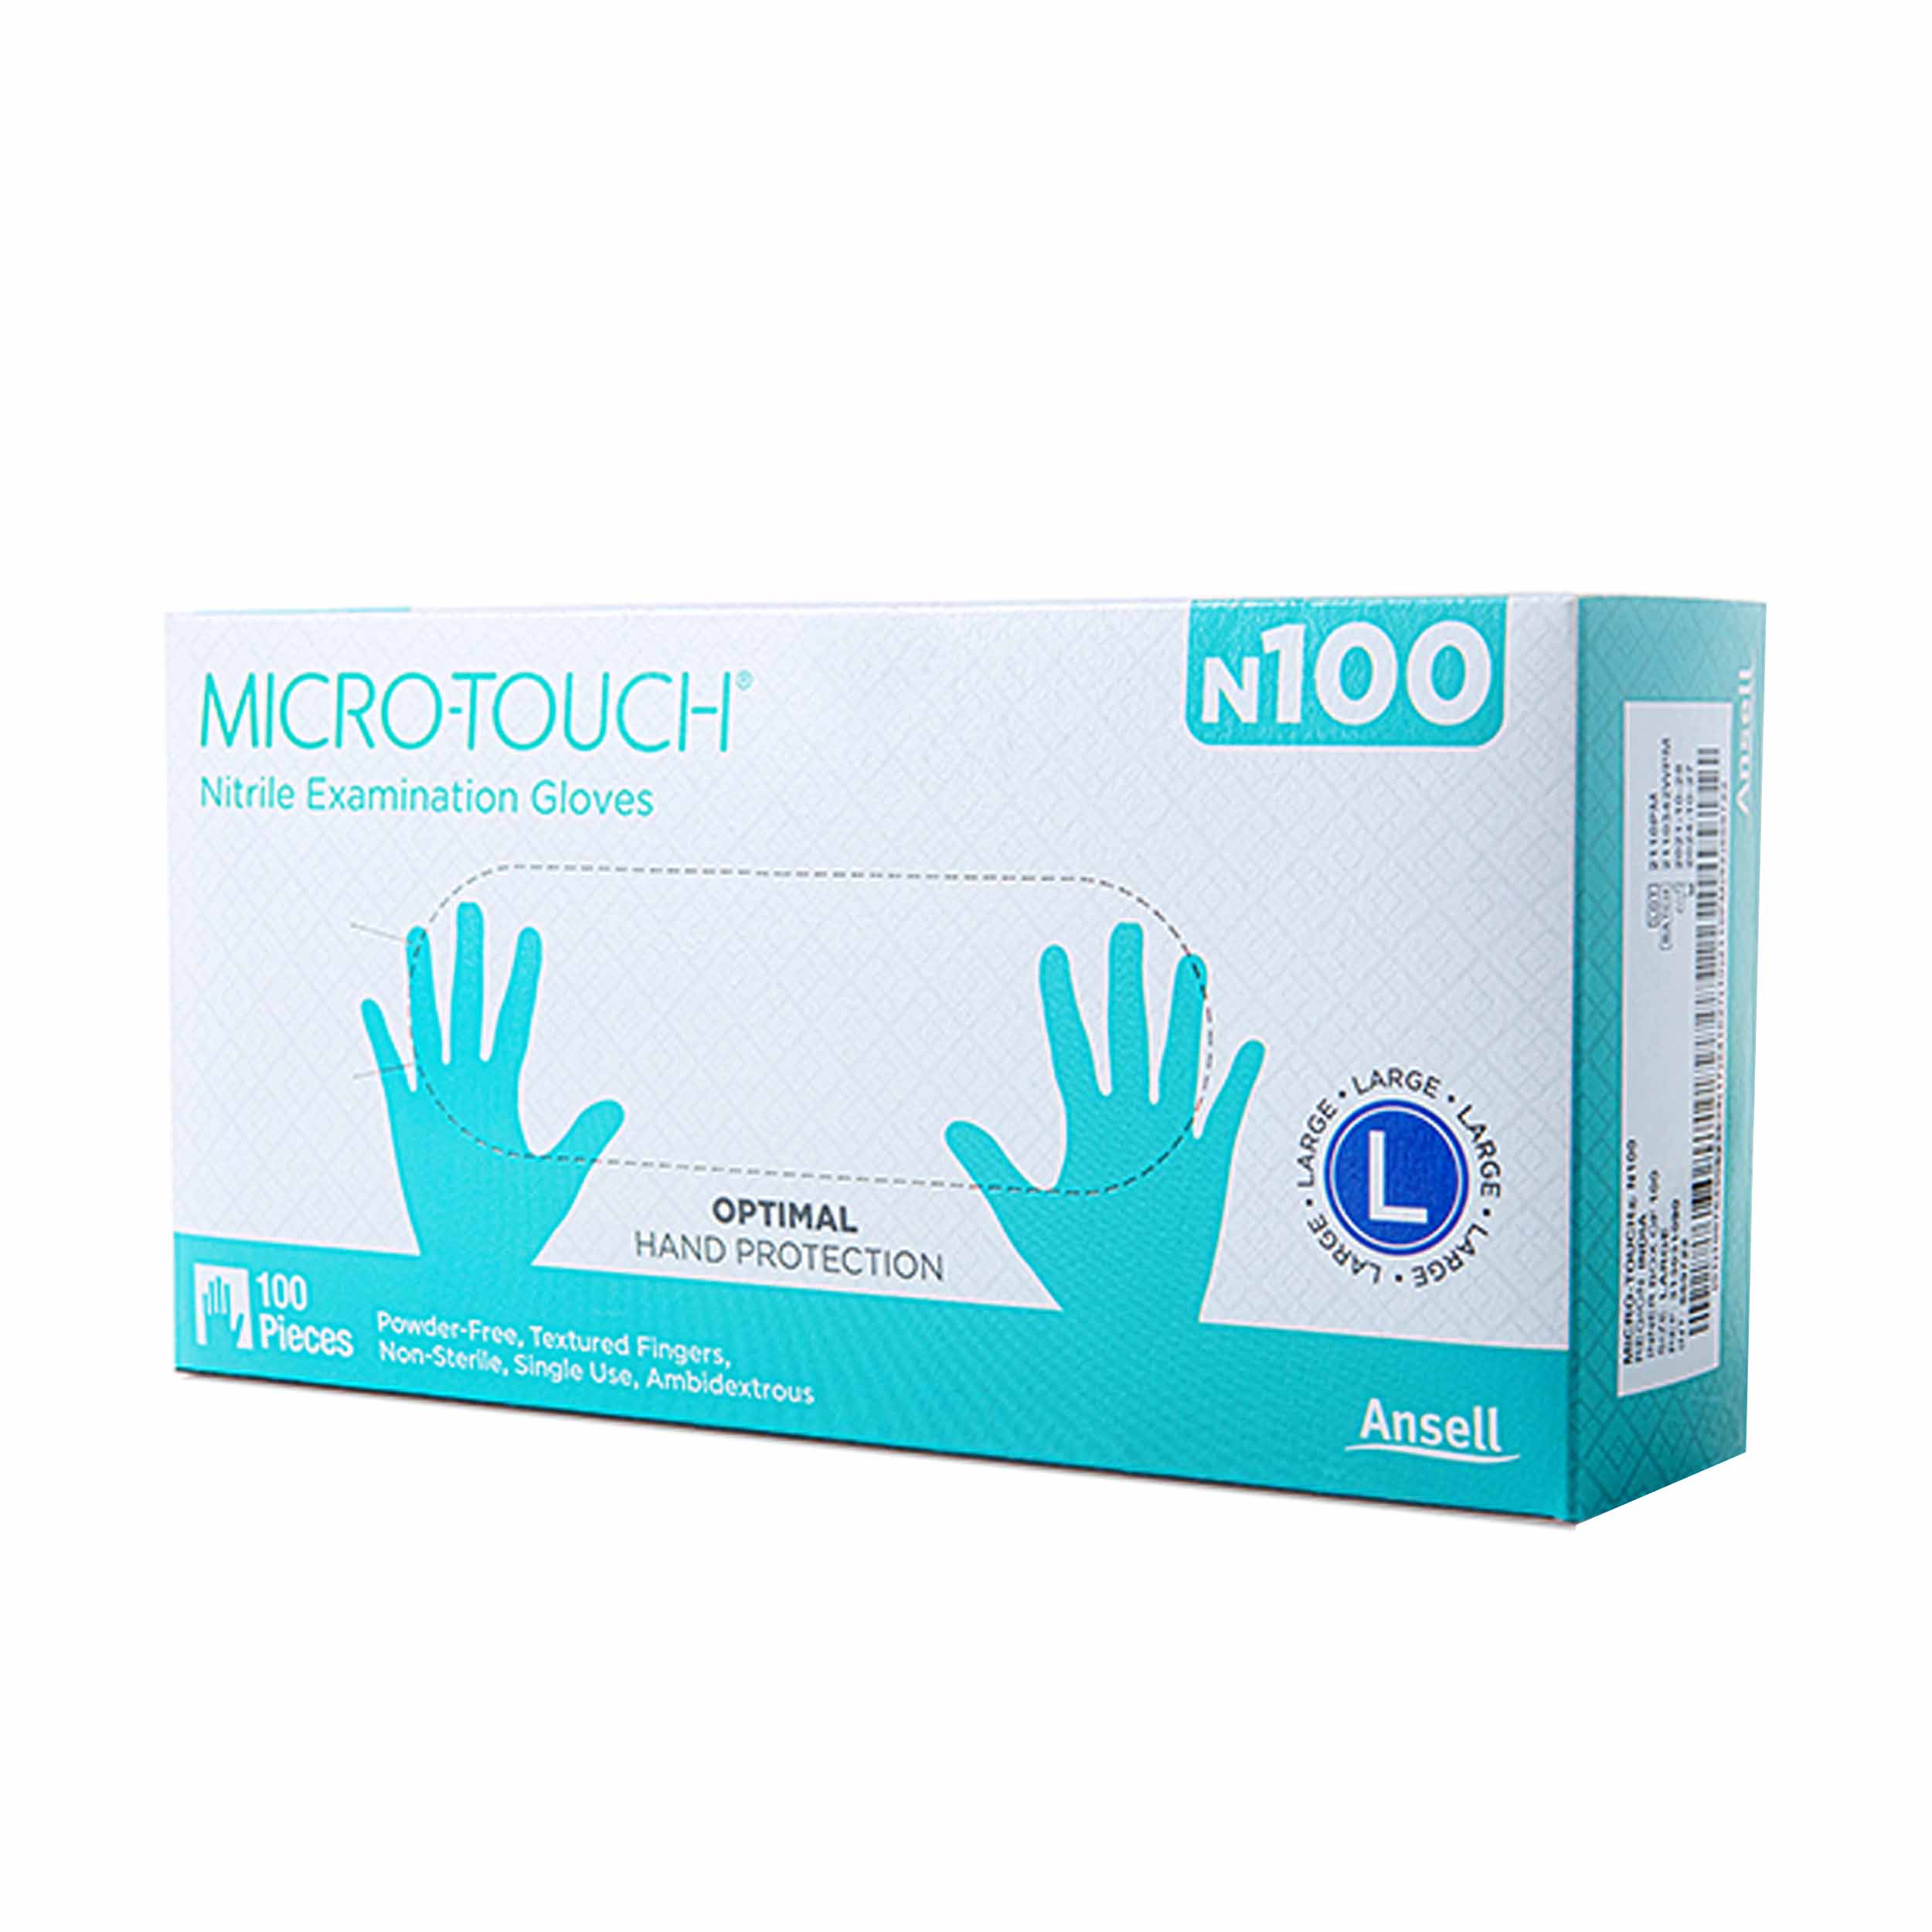 Ansell Micro Touch Nitrile Examination Gloves N100 Large